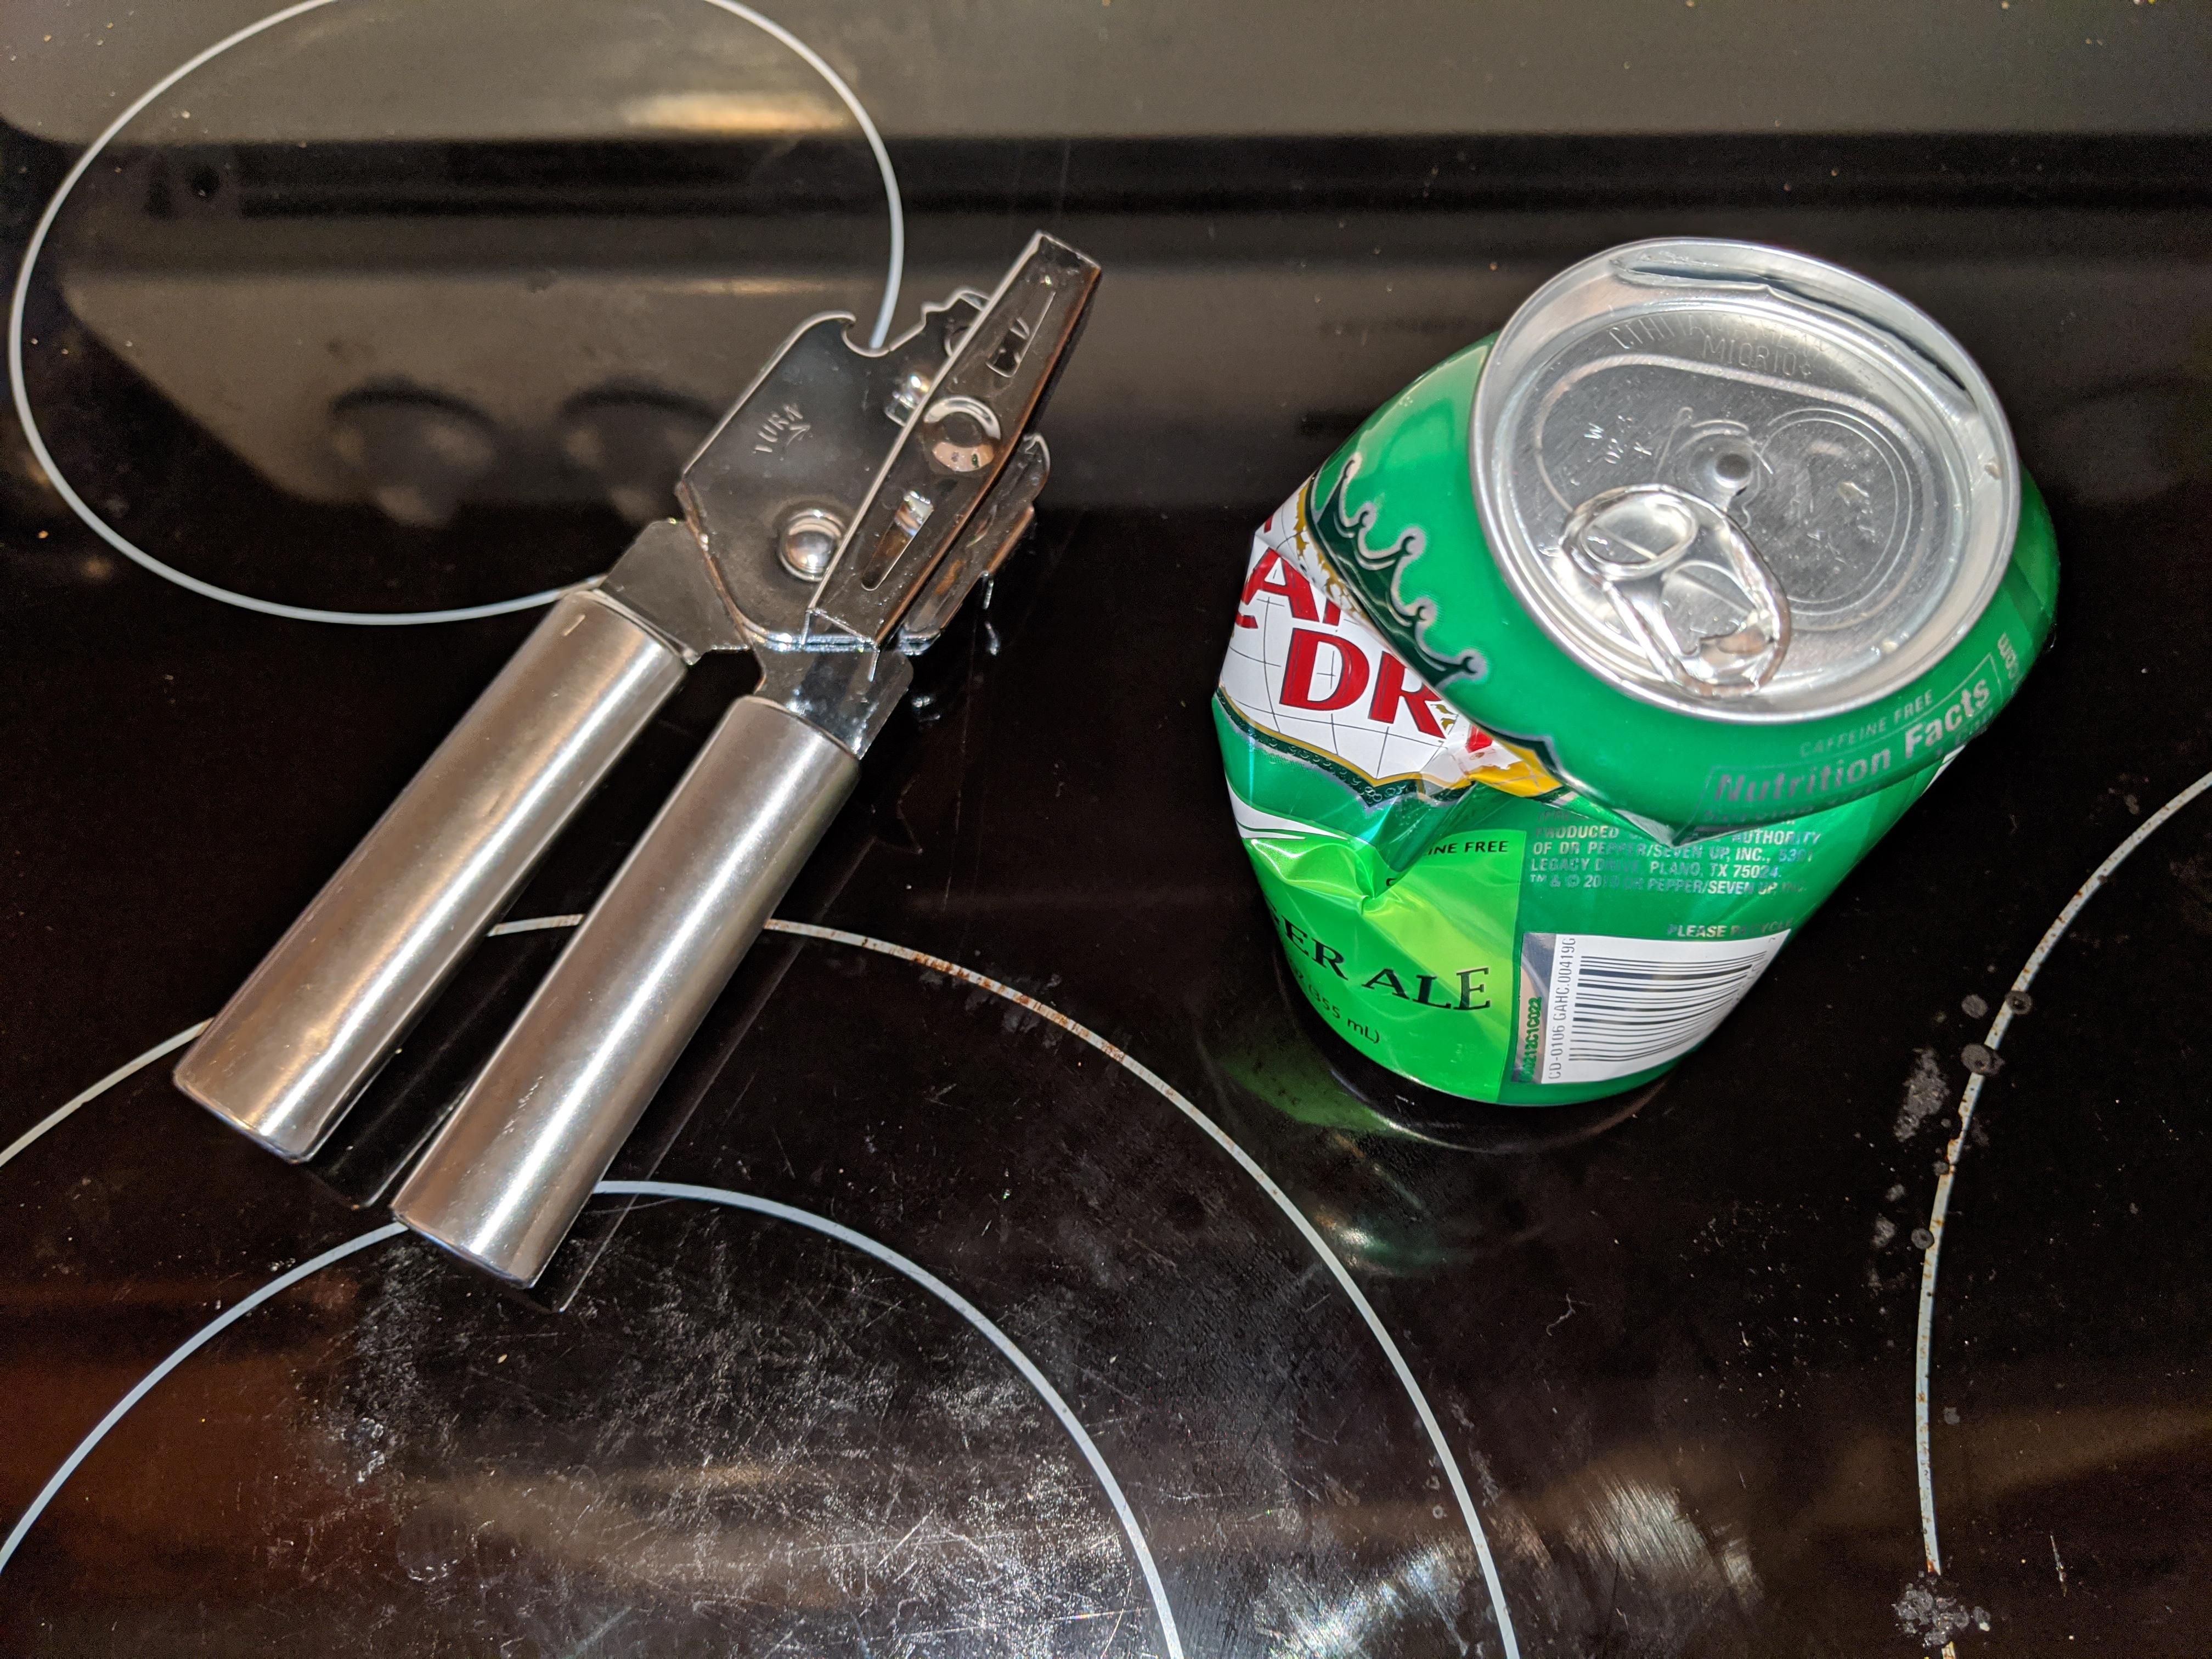 Woke up this morning and found this on the stove. I guess my wife wanted a Ginger Ale last night, but the can didn't want to share.